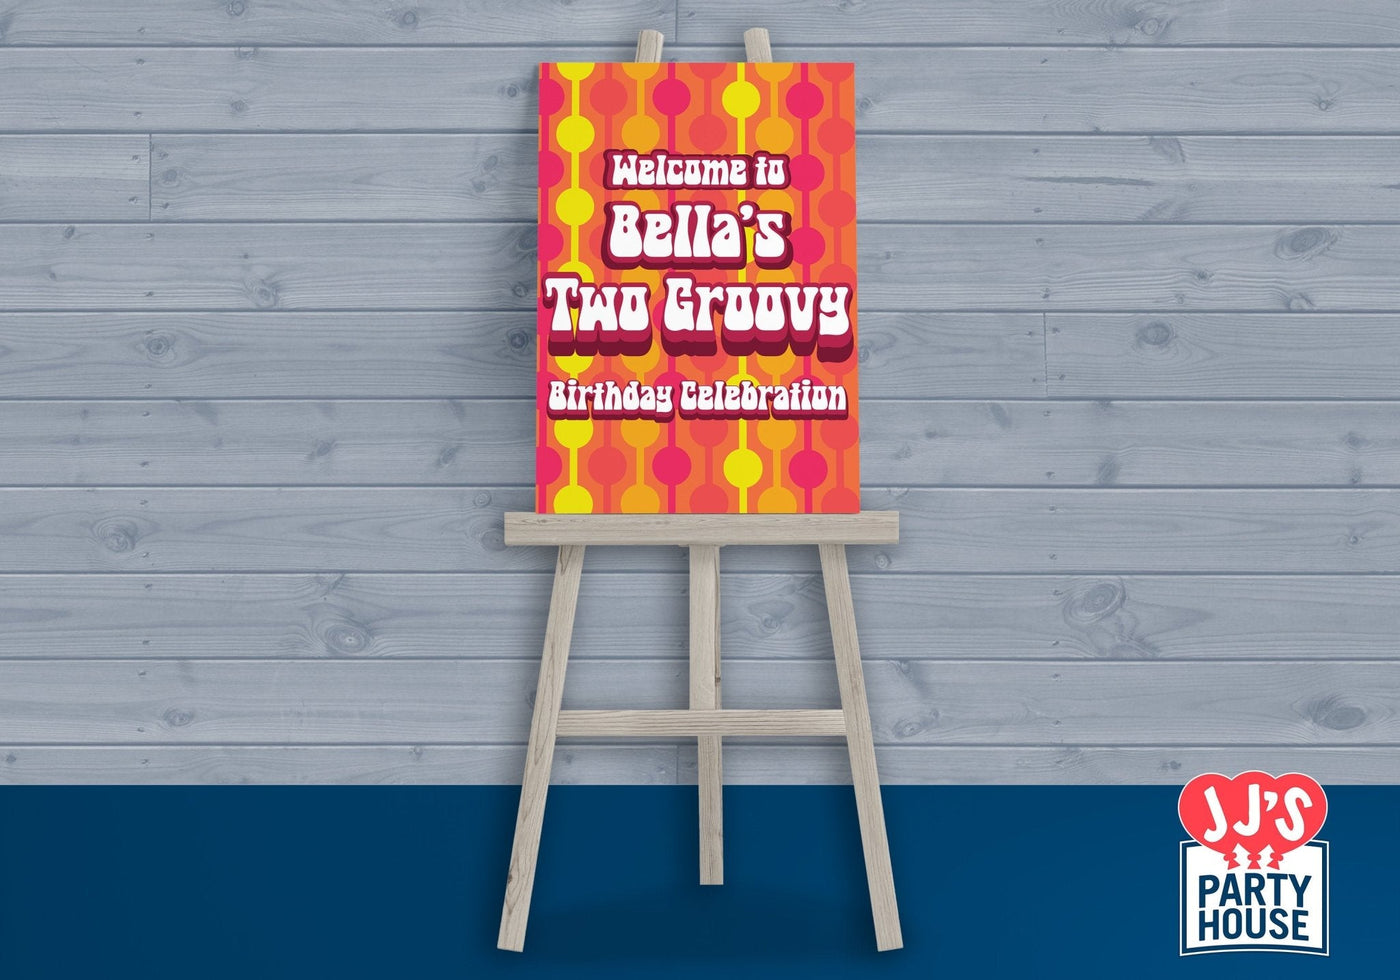 Custom Printed Two Groovy 60s Birthday Personalized Yard Sign for Birthday Party - JJ's Party House